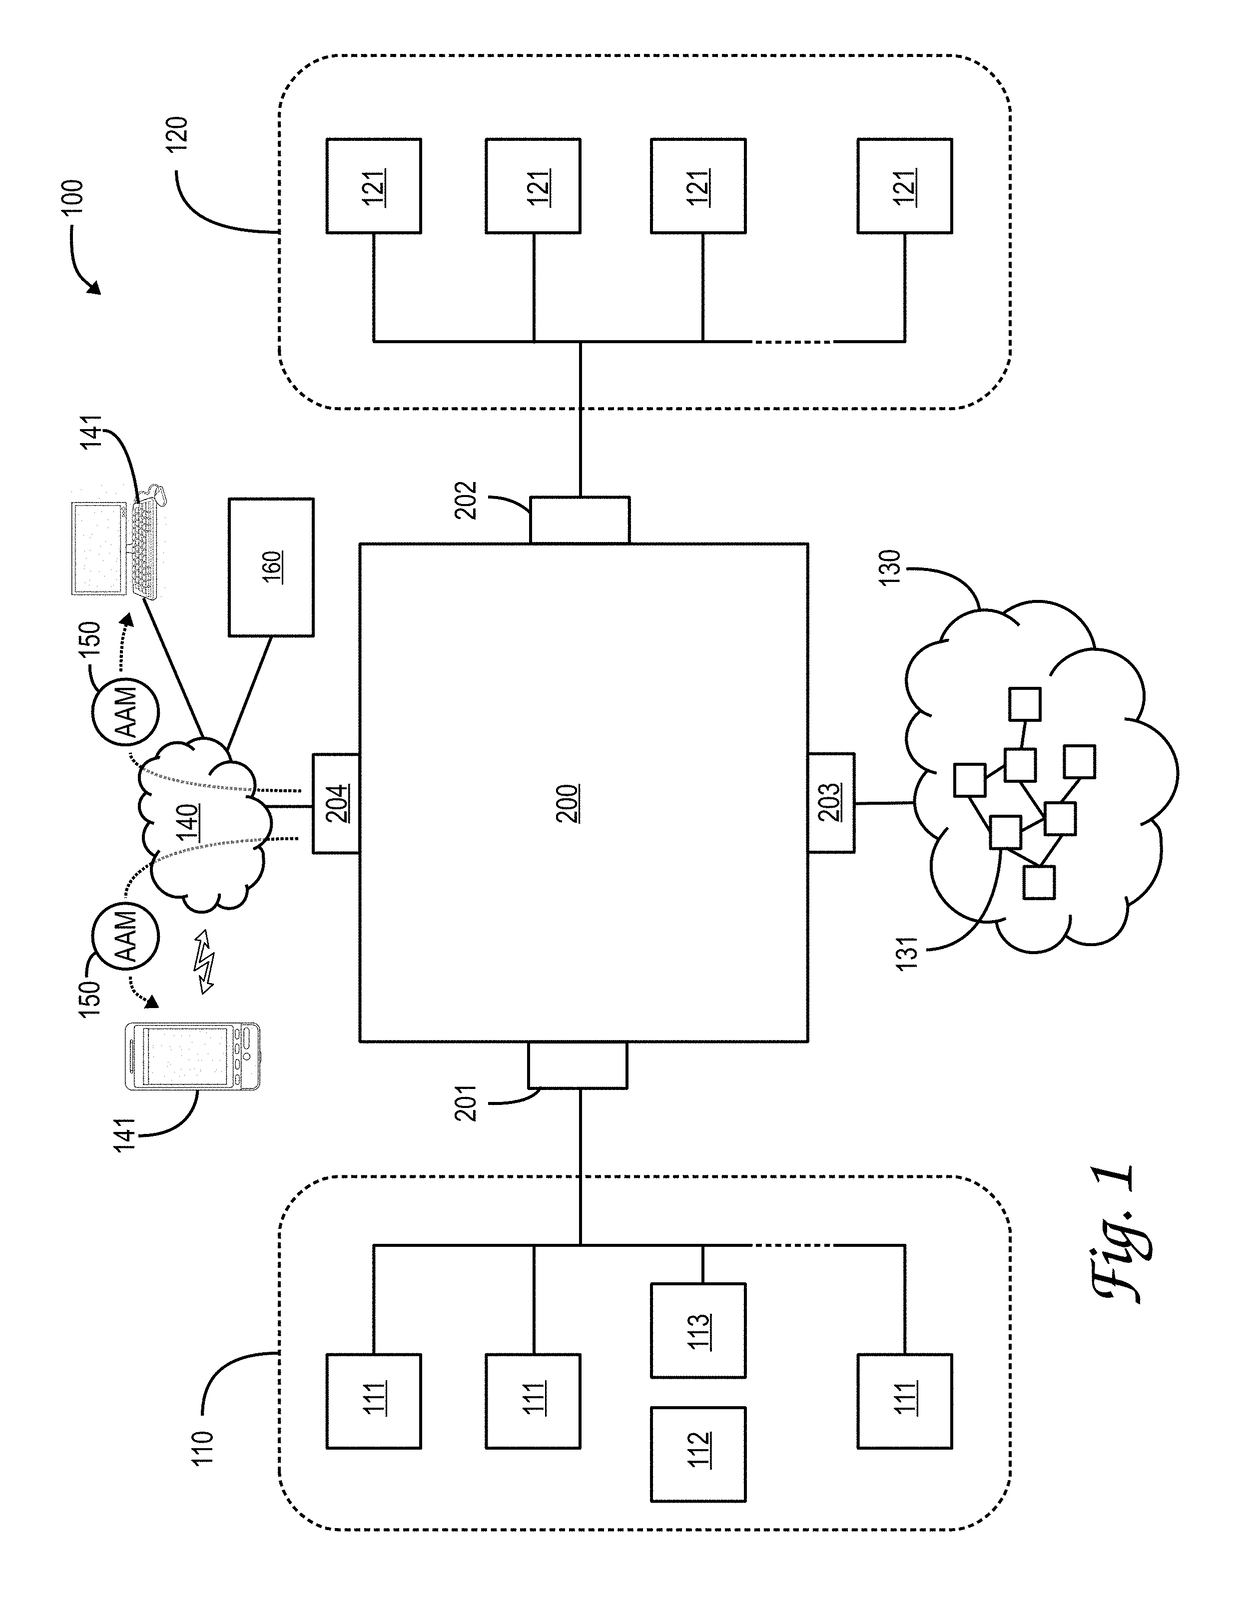 System and method to assist building automation system end user based on alarm parameters